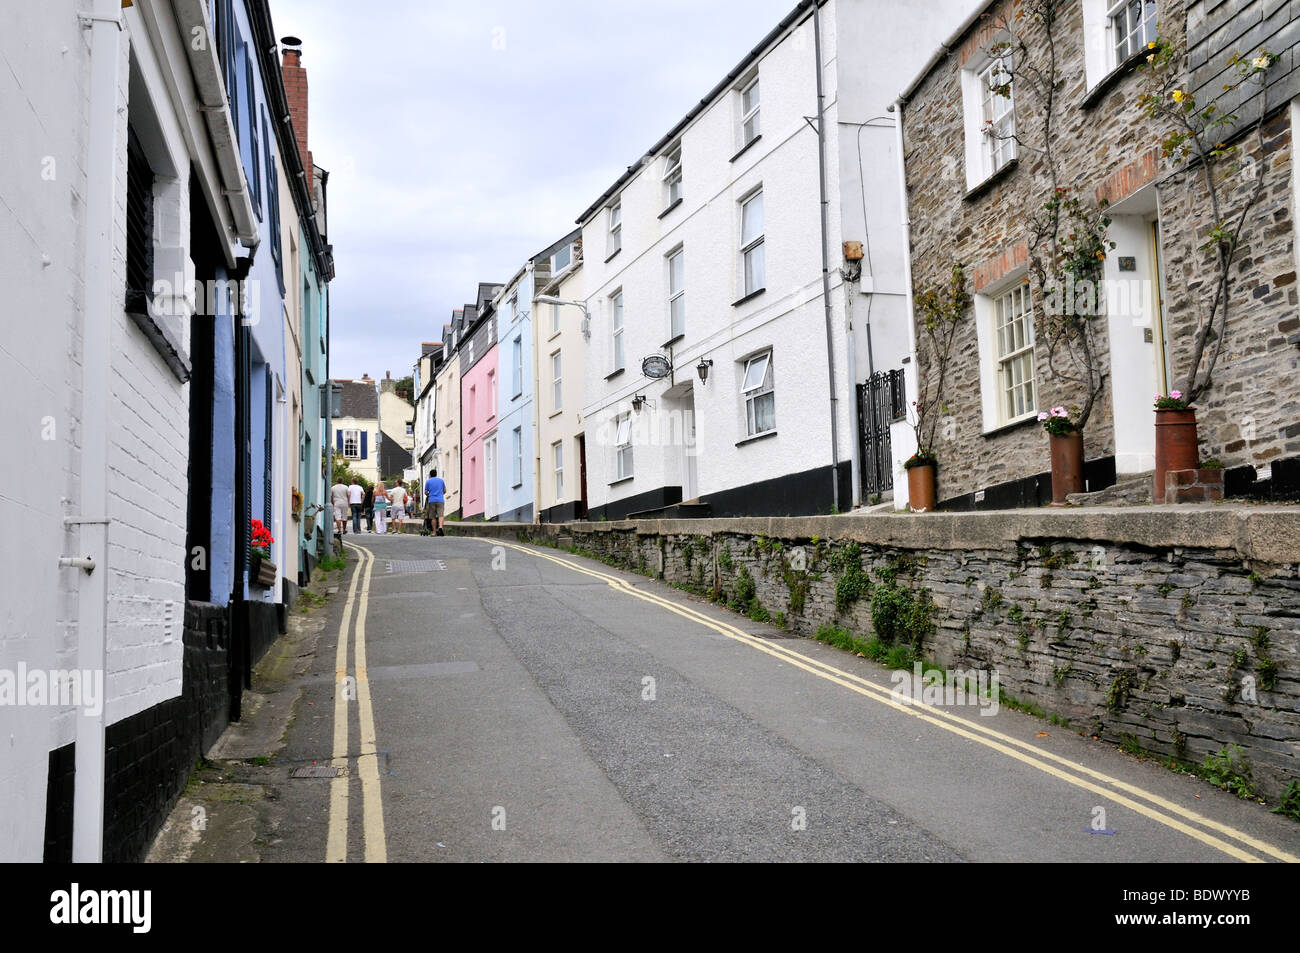 Multi-coloured buildings, Padstow, Cornwall, England. Stock Photo